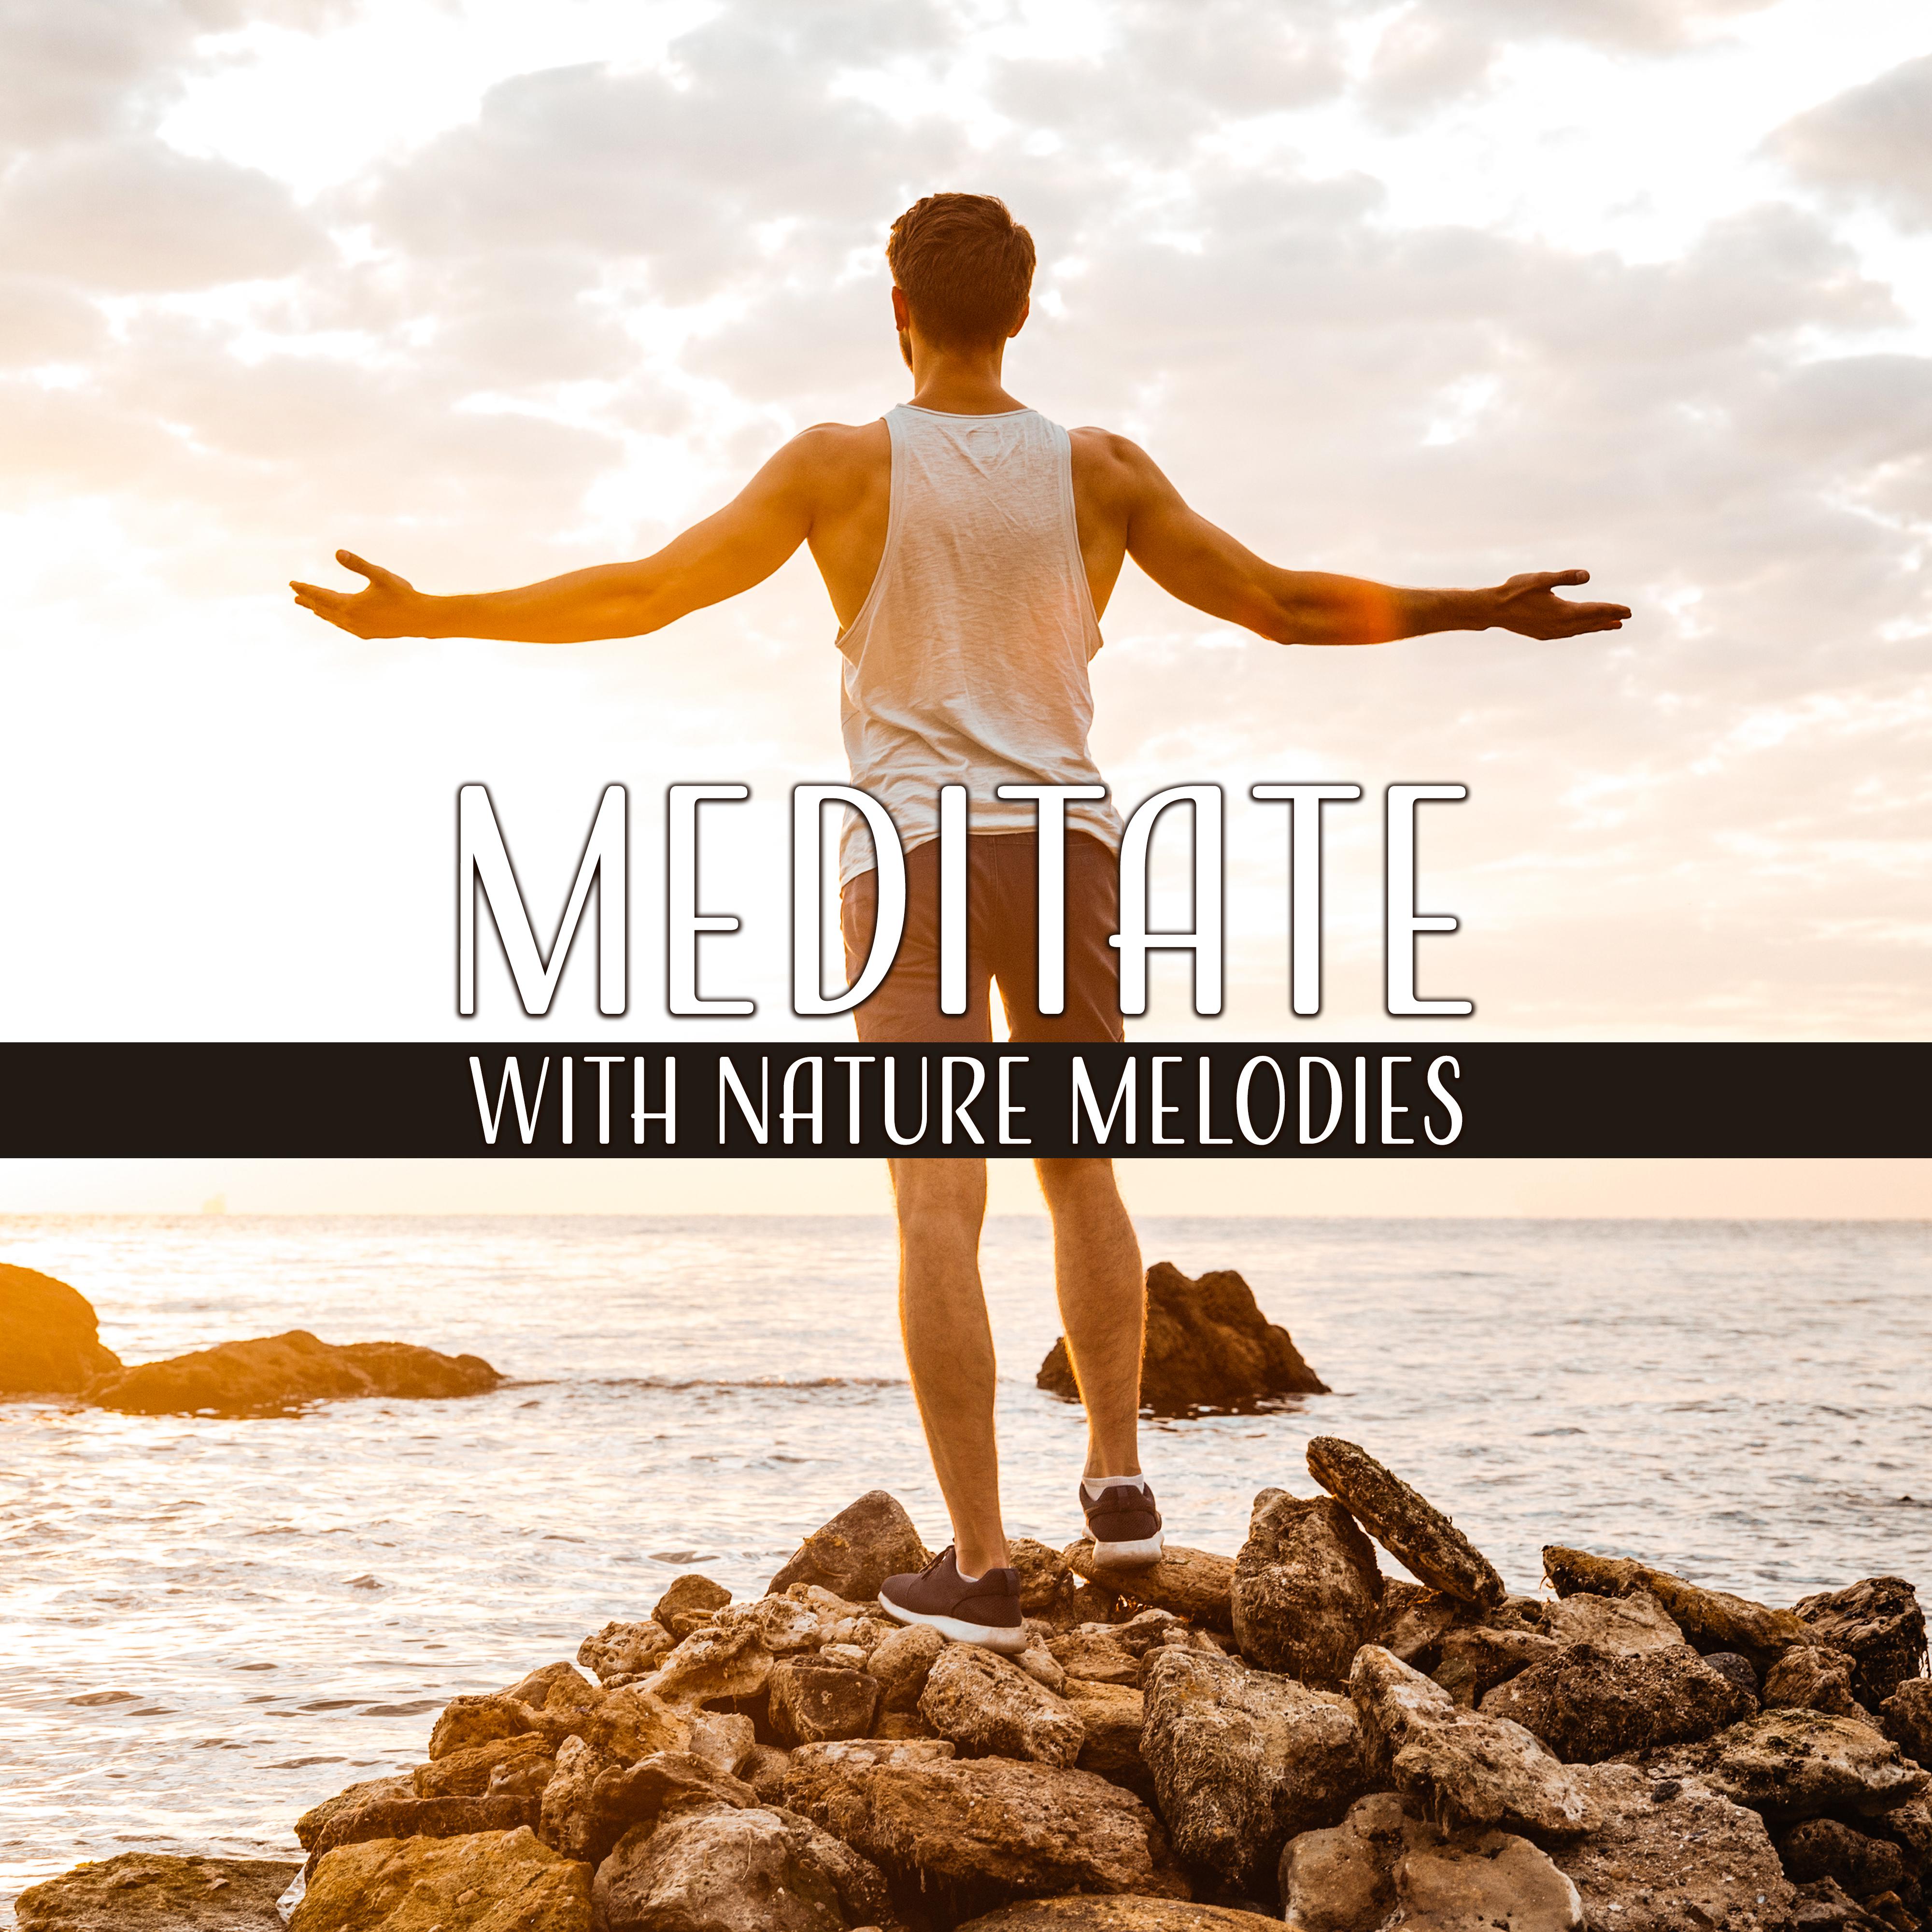 Meditate with Nature Melodies – Soothing Sounds for Relaxation, Peaceful Melodies to Meditate, Chakra Gathering, Buddha Meditation